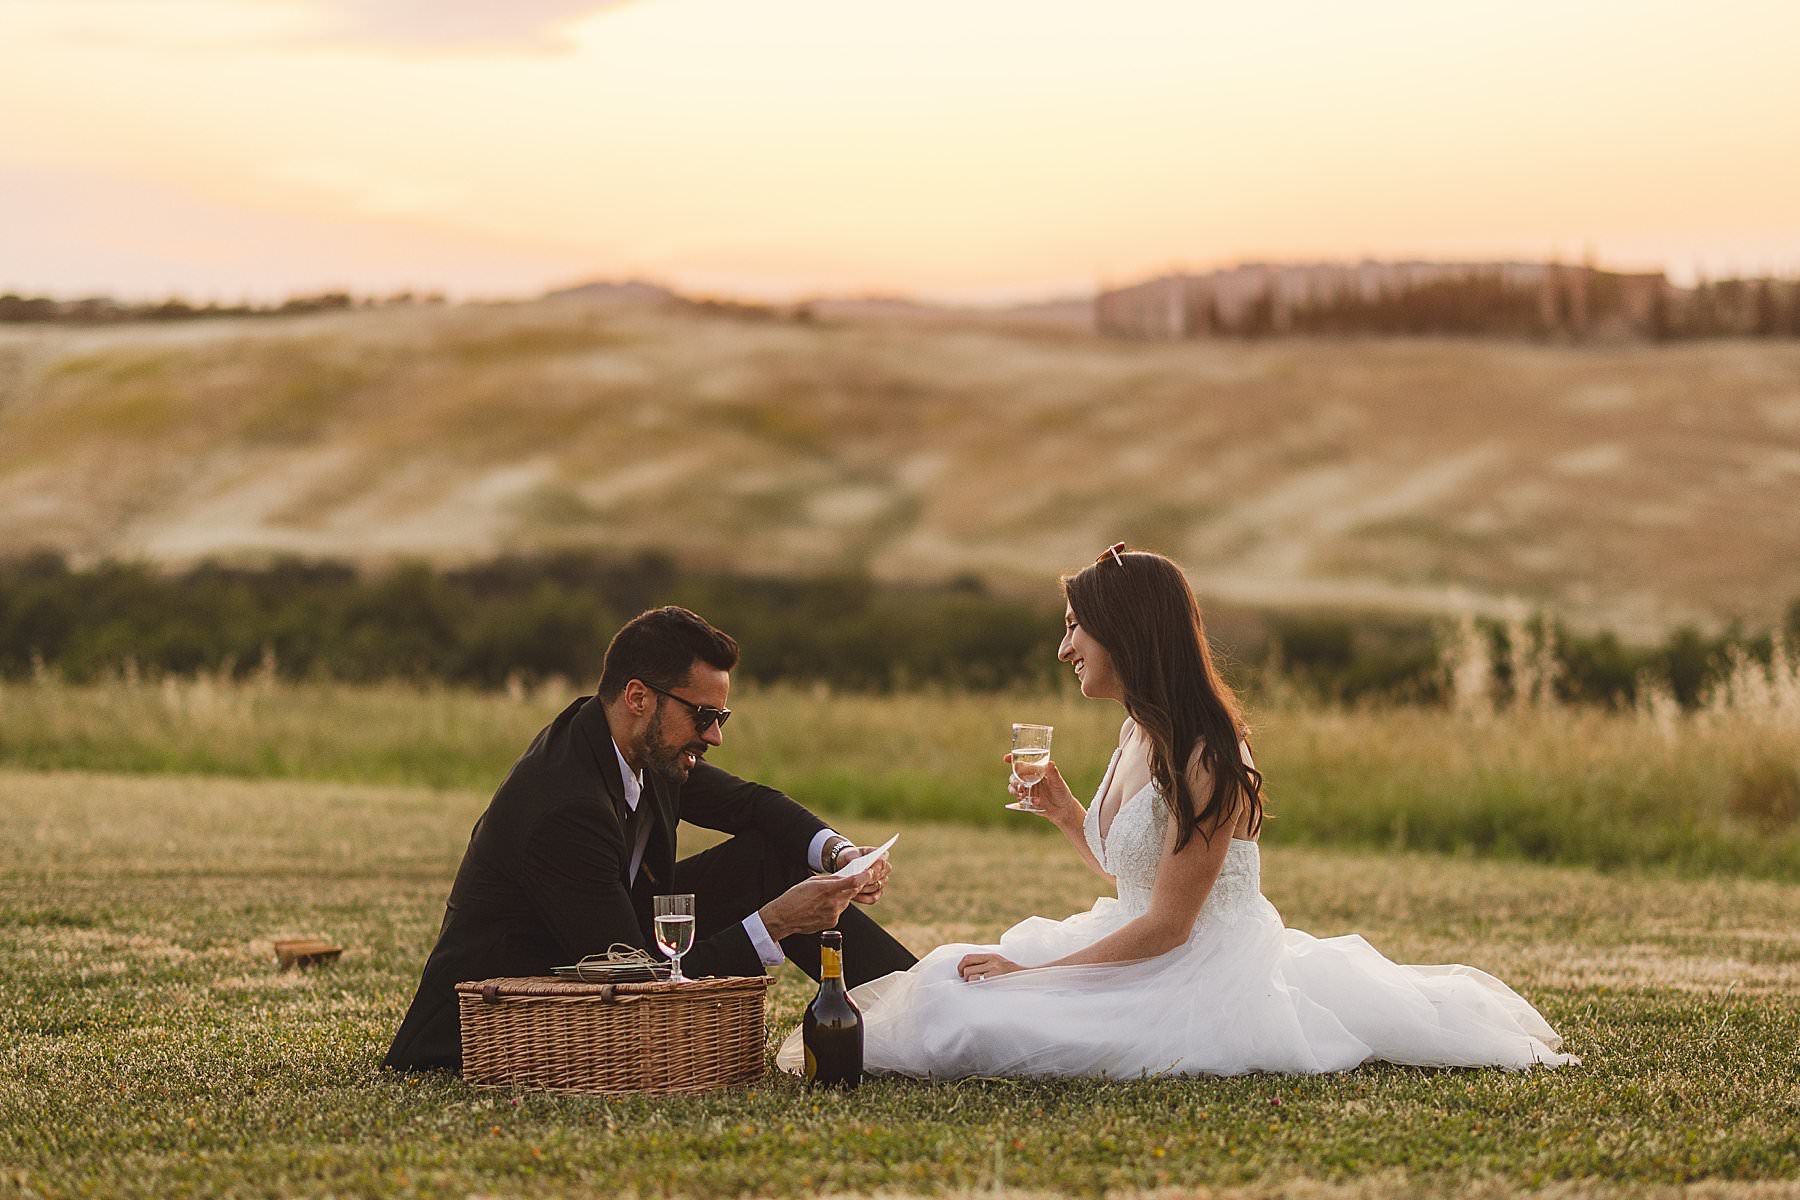 Exciting bride and groom elopement celebration in the golden hour light in the countryside of Tuscany at Vitaleta Chapel near Pienza